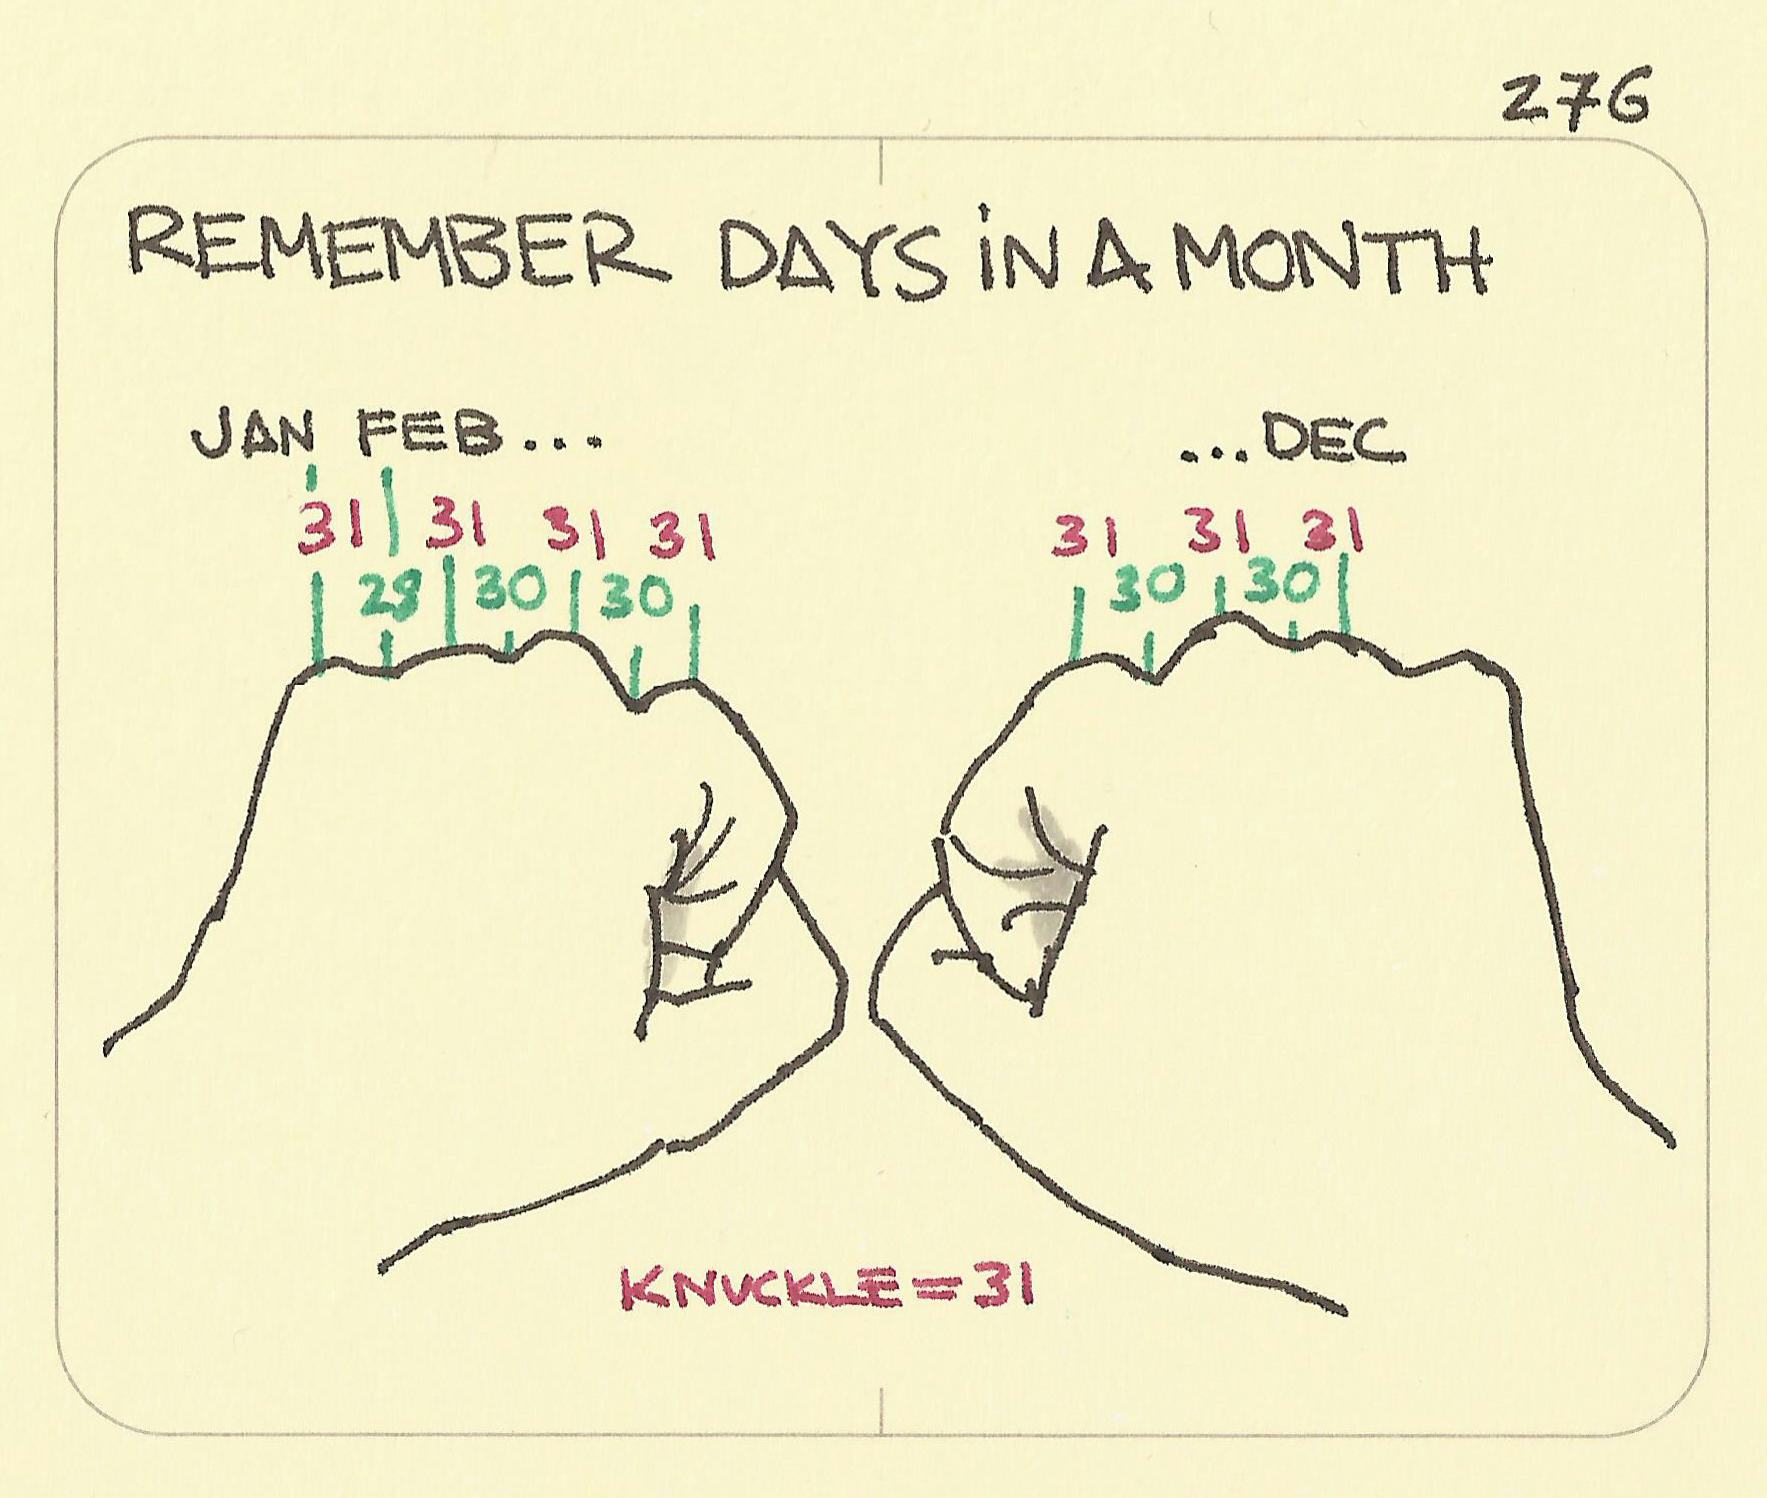 Remember days in a month - Sketchplanations